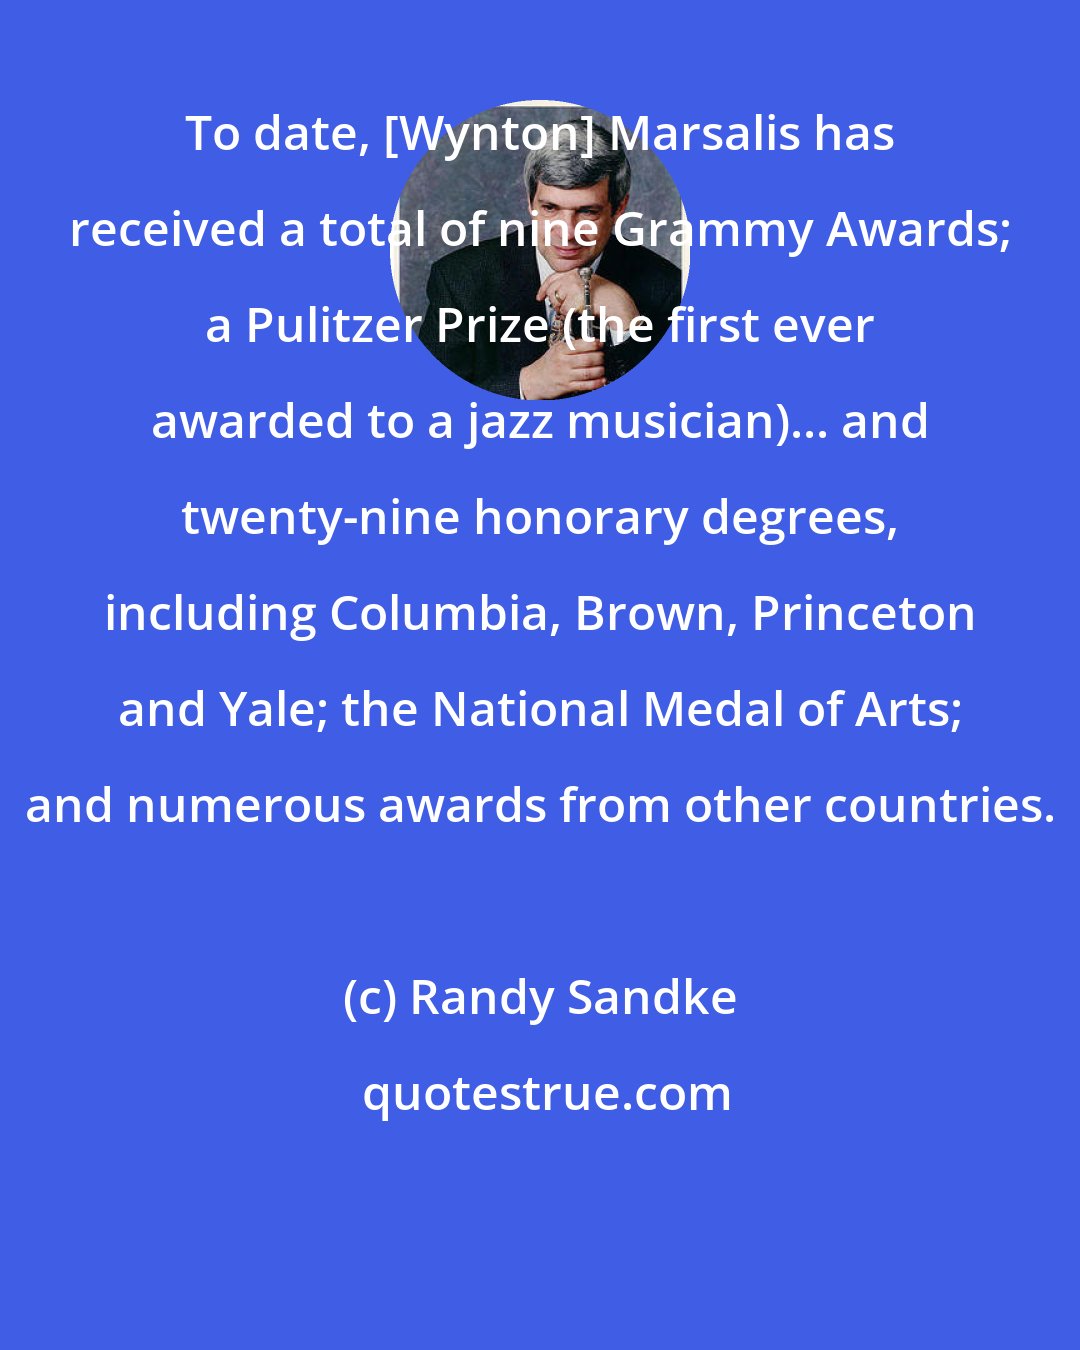 Randy Sandke: To date, [Wynton] Marsalis has received a total of nine Grammy Awards; a Pulitzer Prize (the first ever awarded to a jazz musician)... and twenty-nine honorary degrees, including Columbia, Brown, Princeton and Yale; the National Medal of Arts; and numerous awards from other countries.